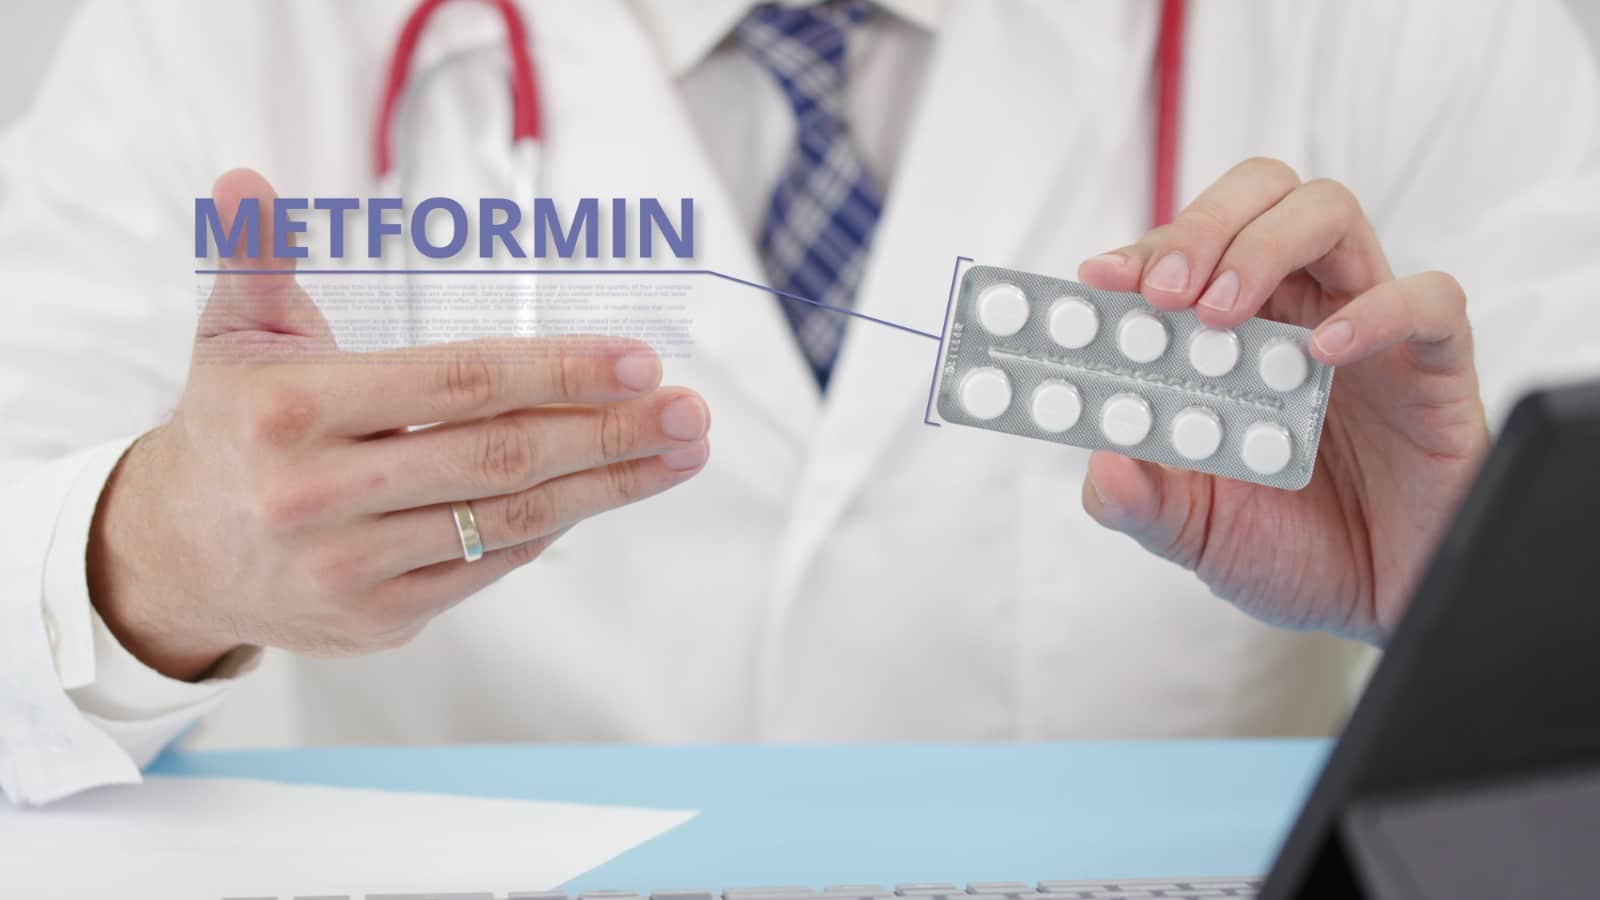 A guide to managing metformin while traveling with diabetes